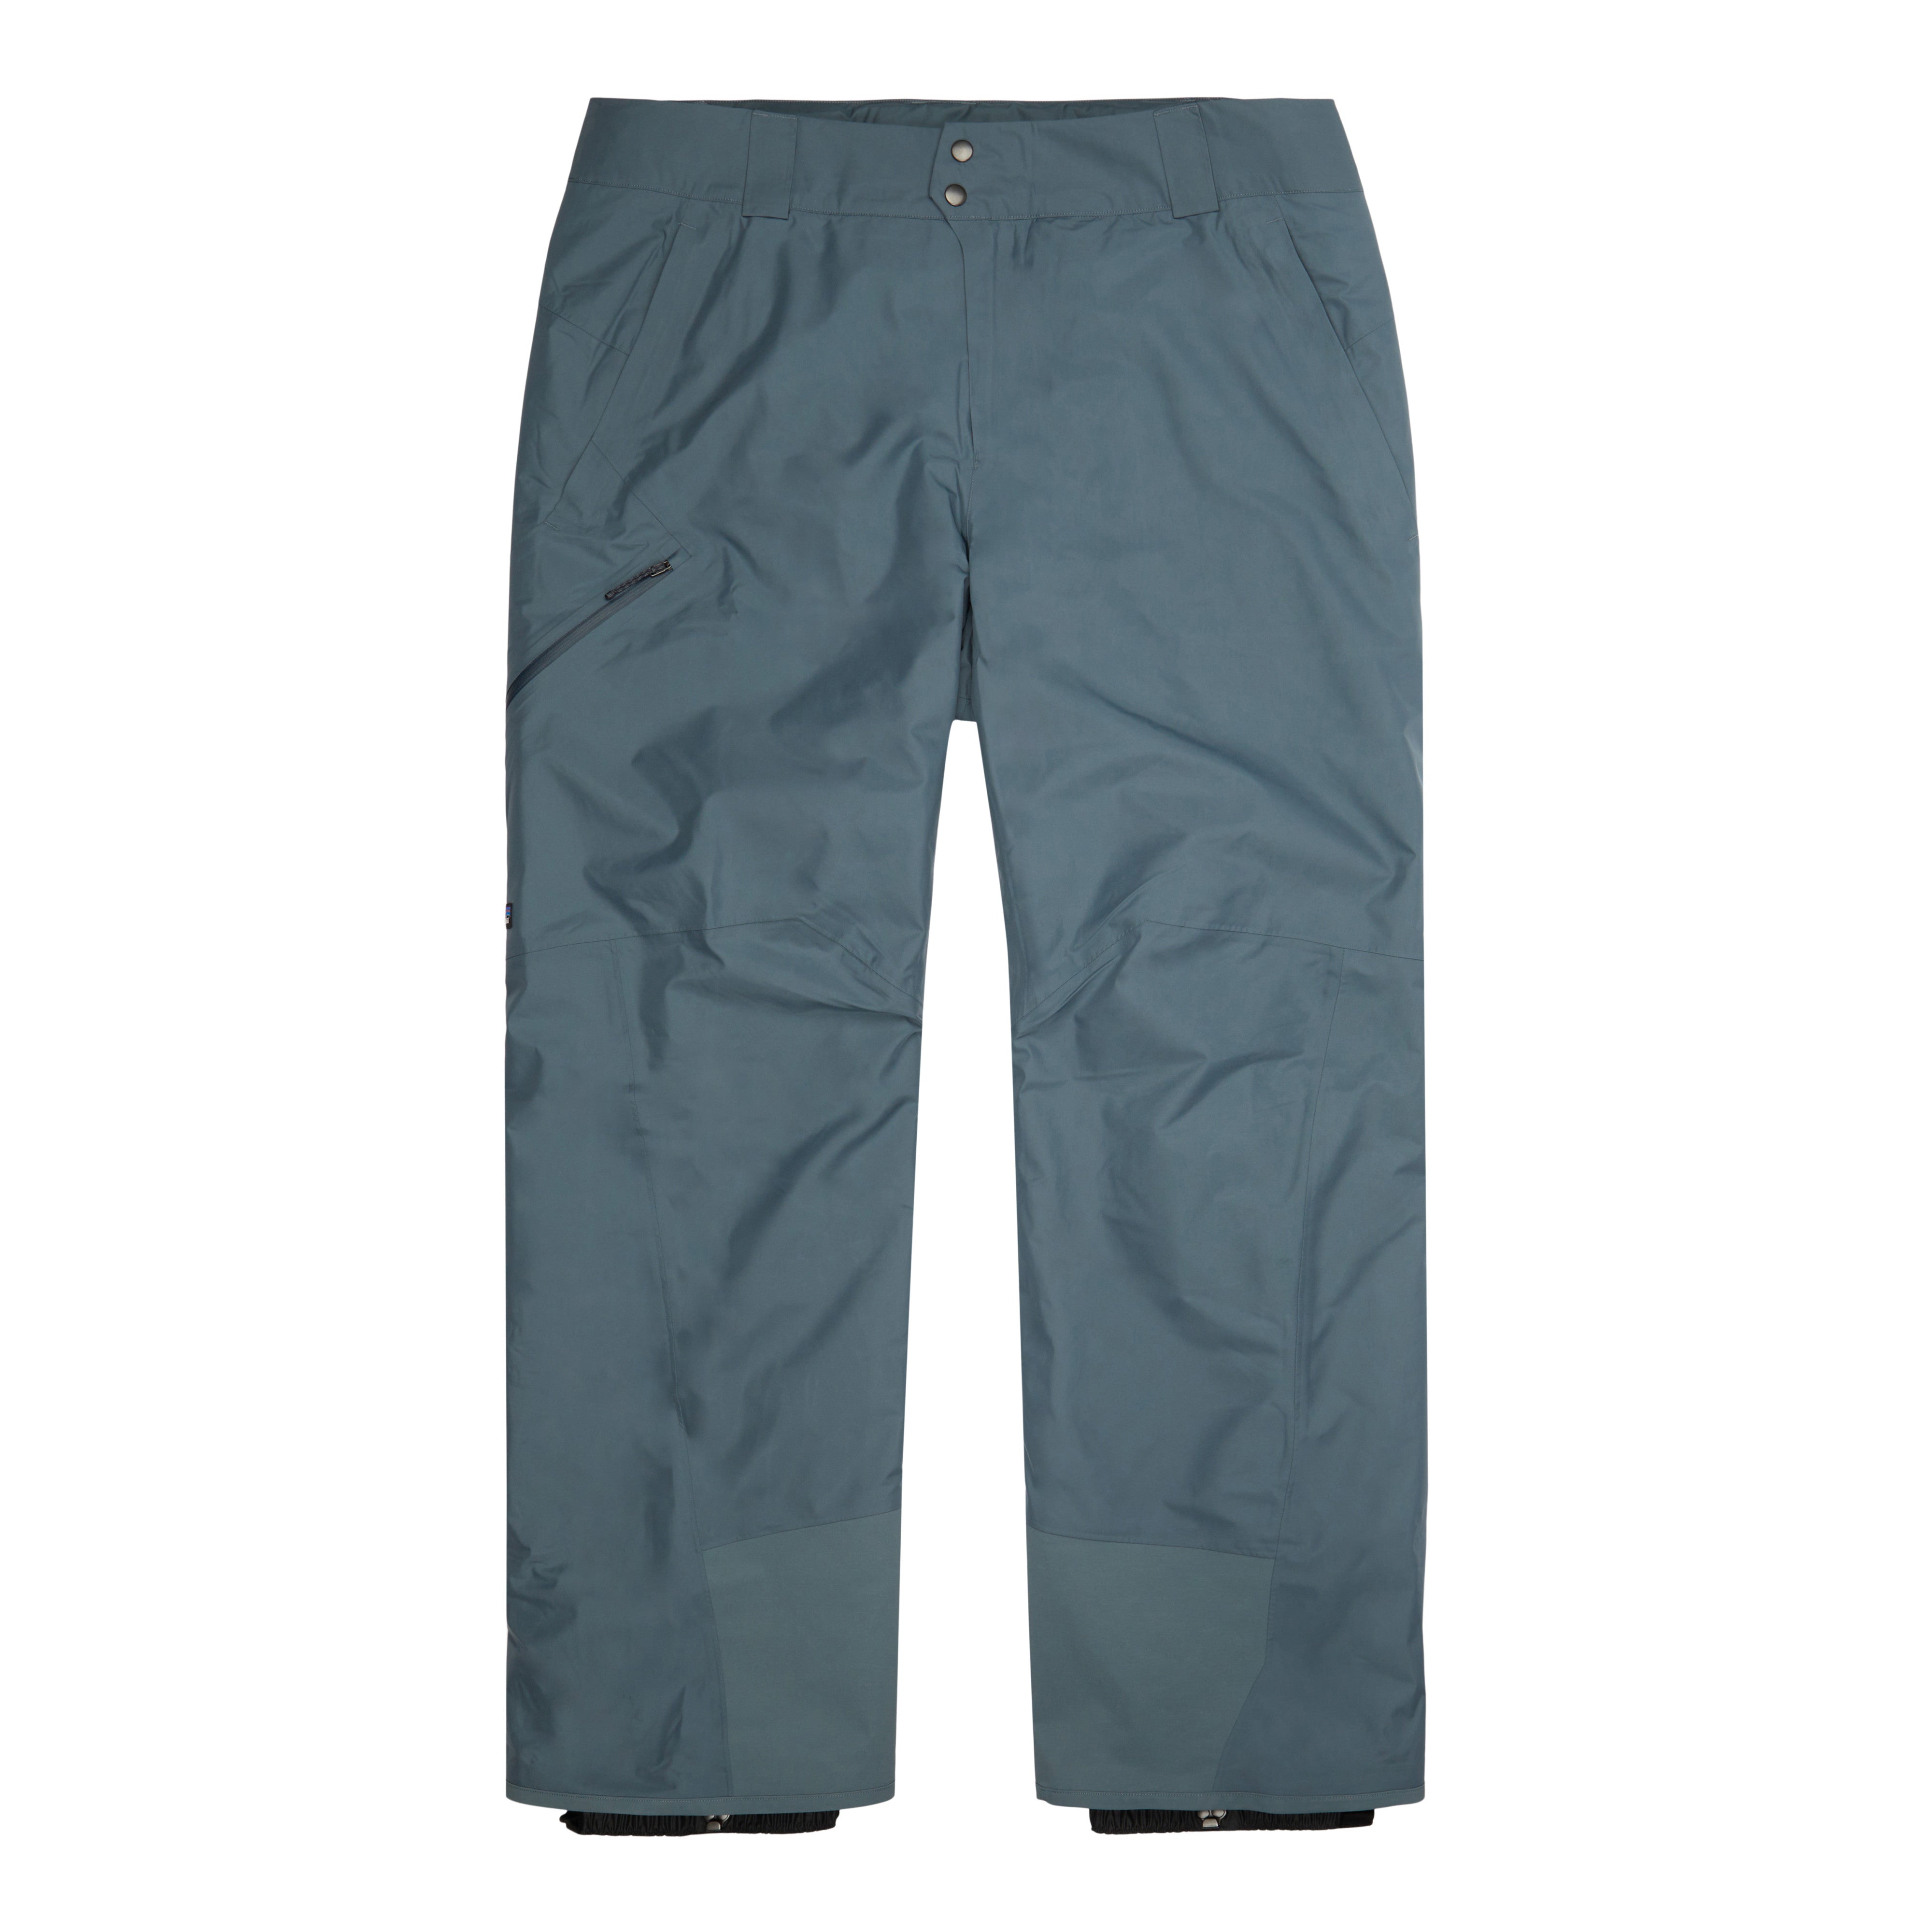 Men's Insulated Powder Town Pants